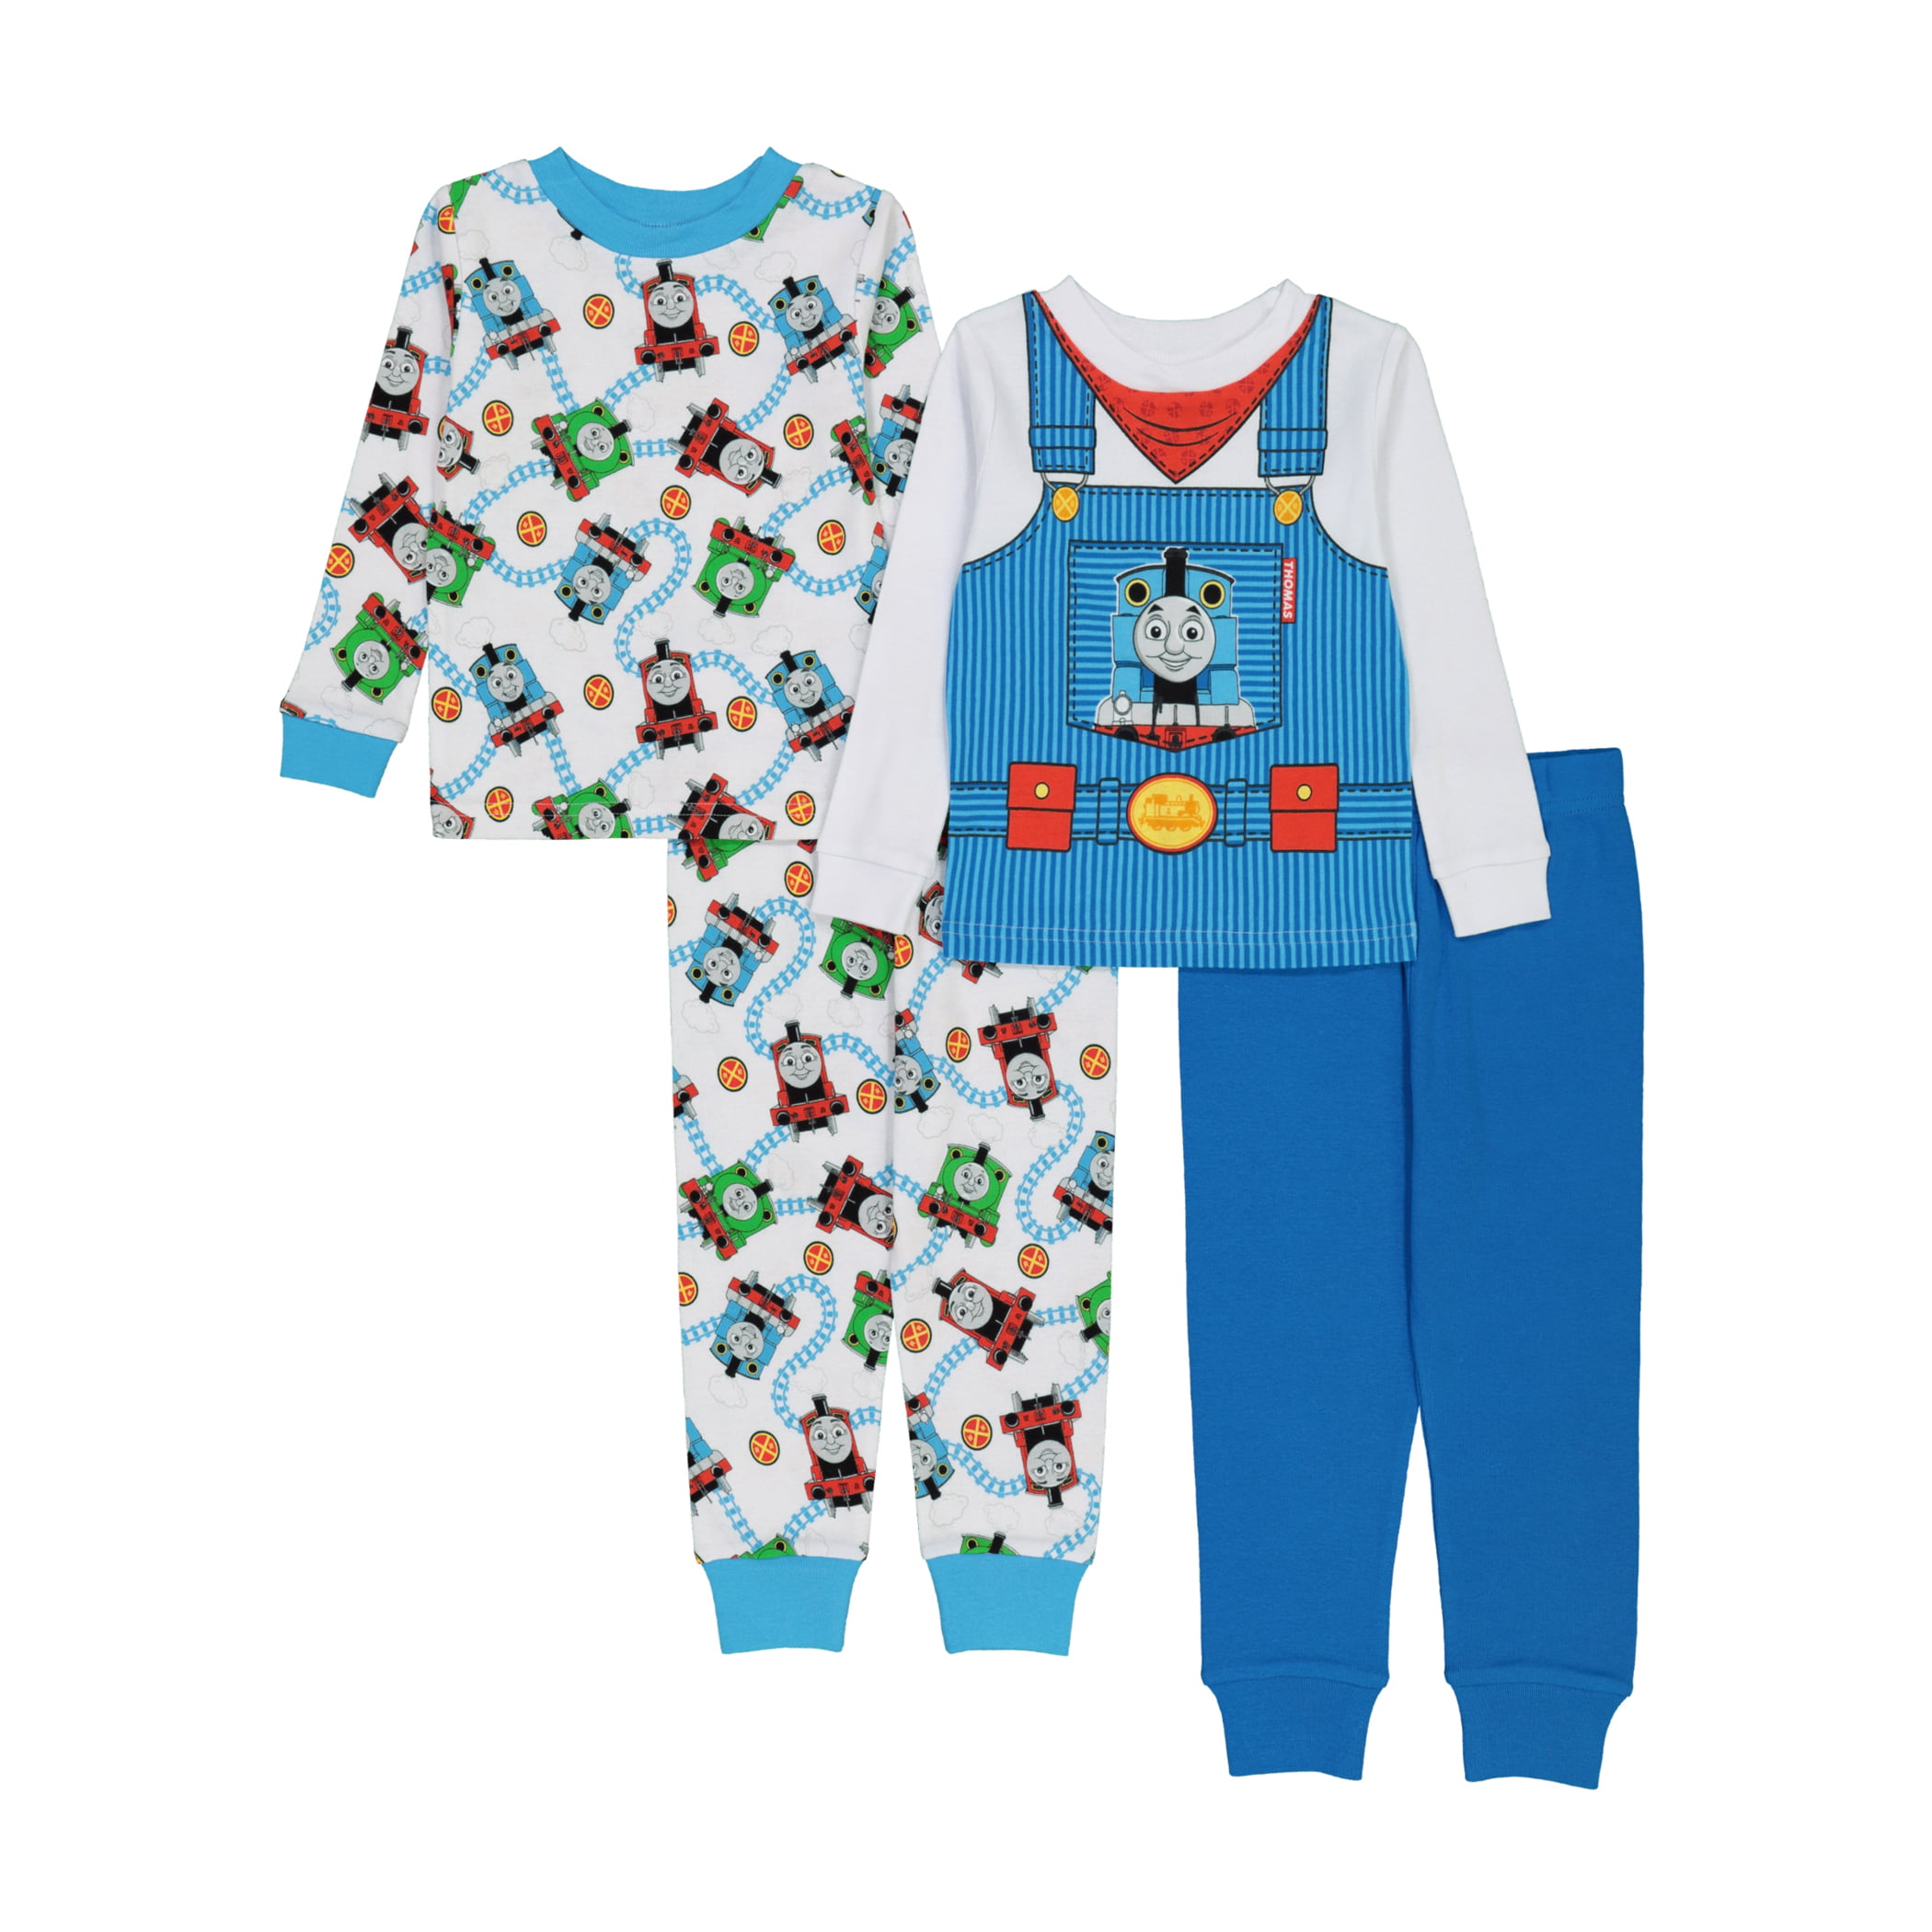 Toddler Boy's Girl's THOMAS THE TRAIN 3T 4T 5T Holiday ROBE Pajama Cover PJS 